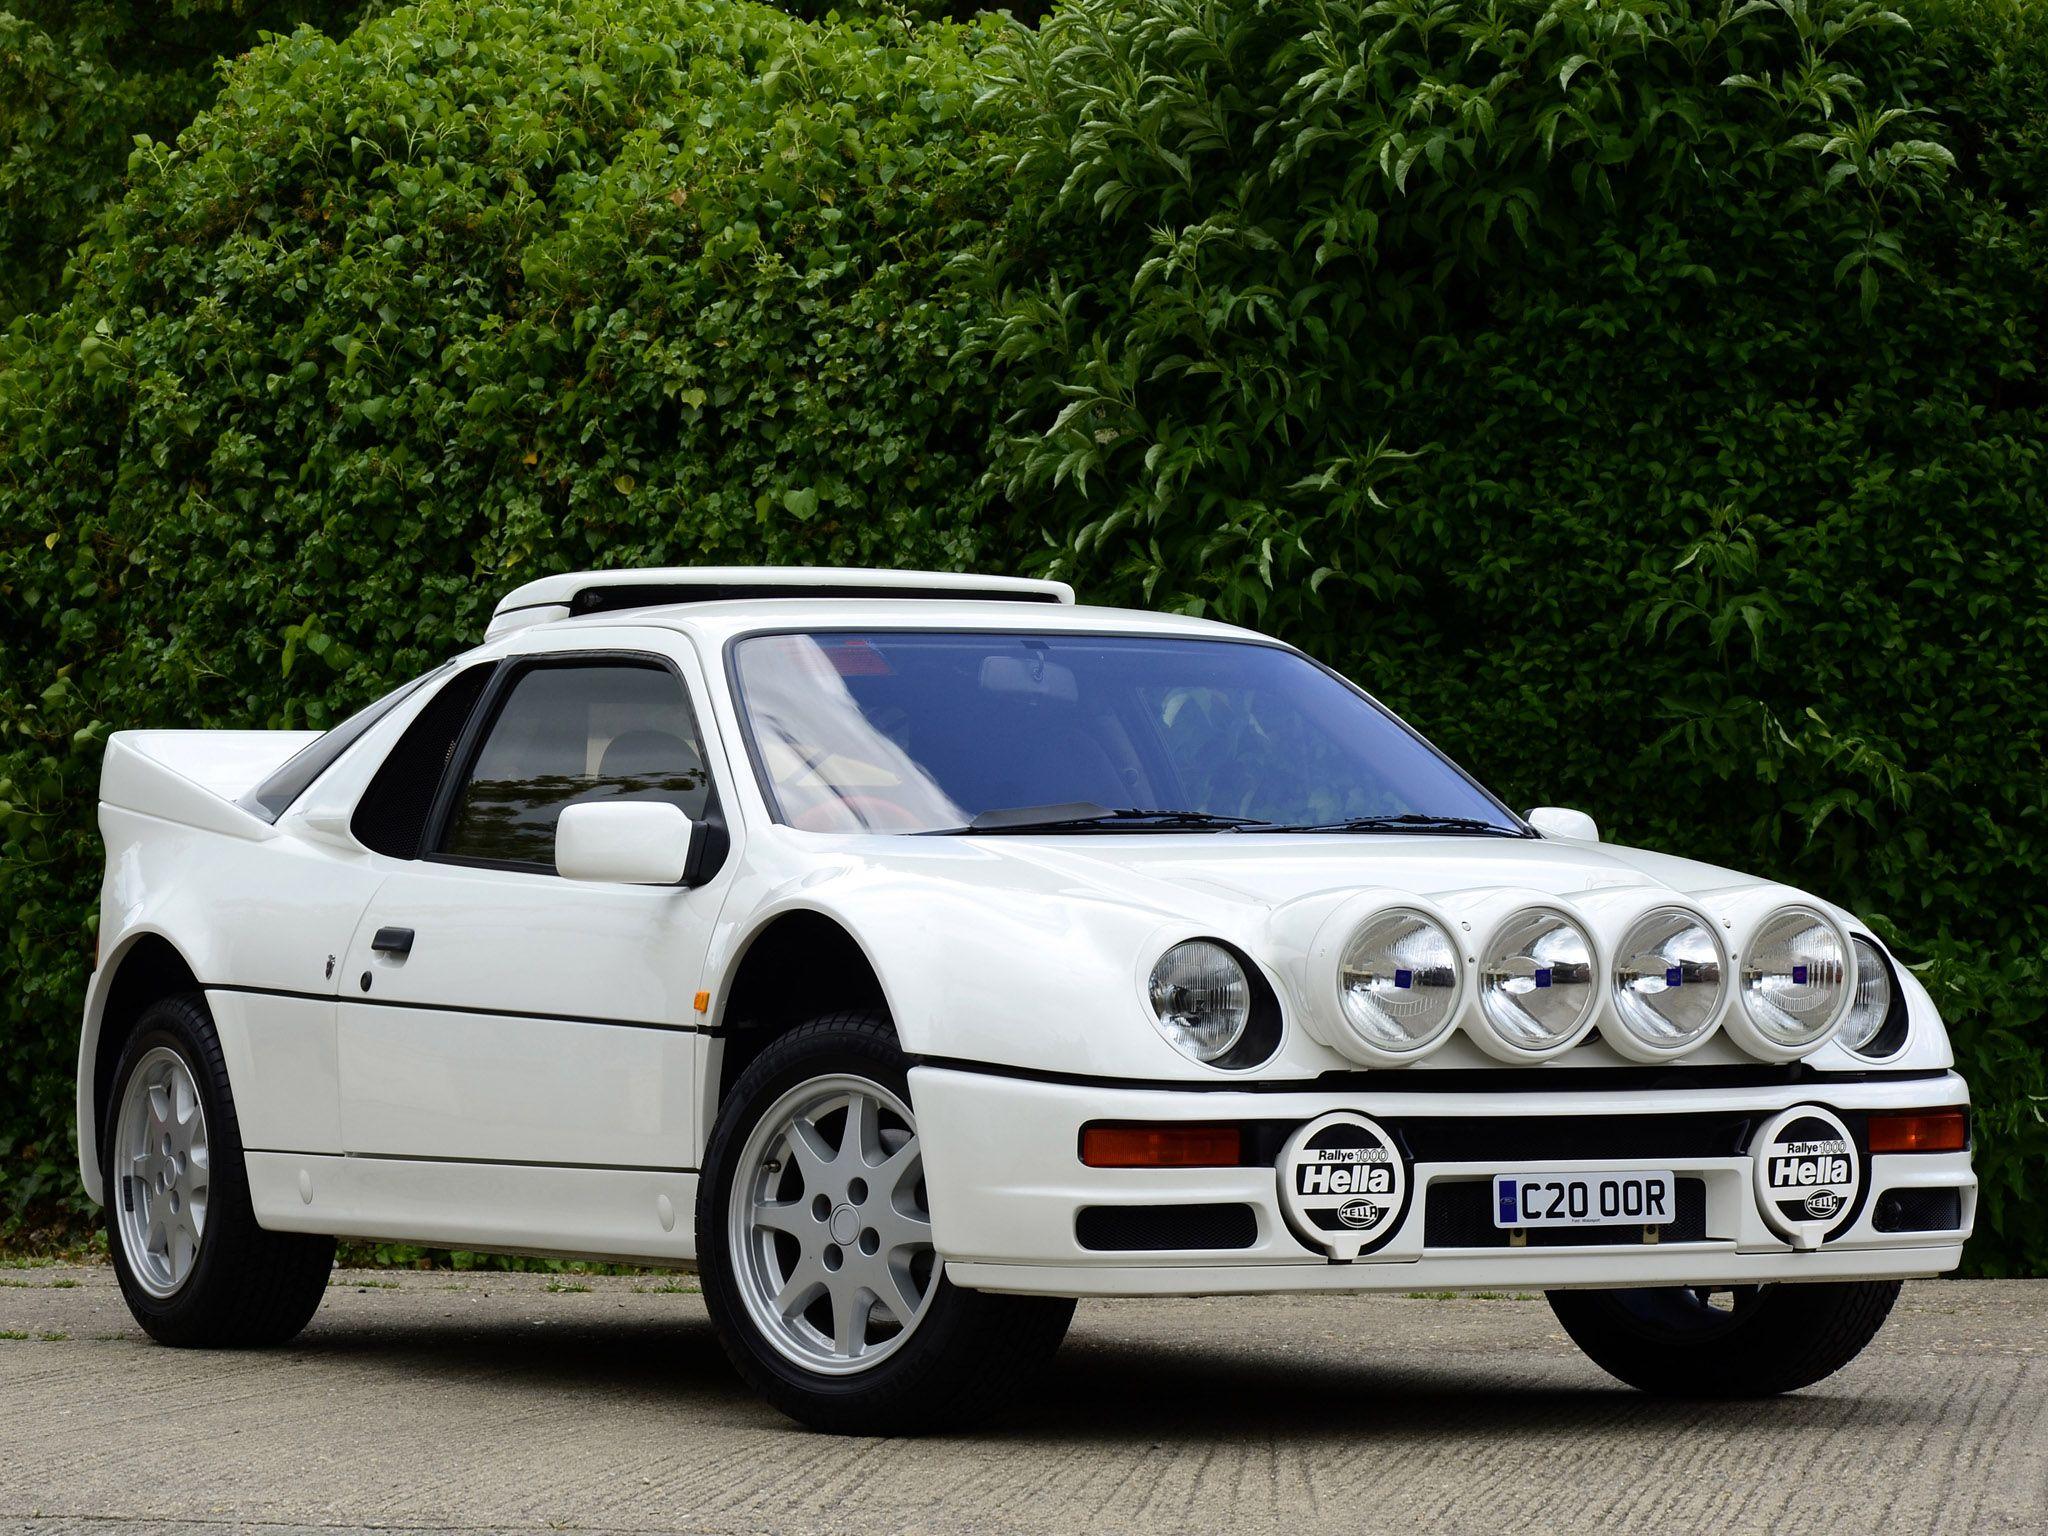 Ford RS200 supercar supercars classic race racing v wallpaper